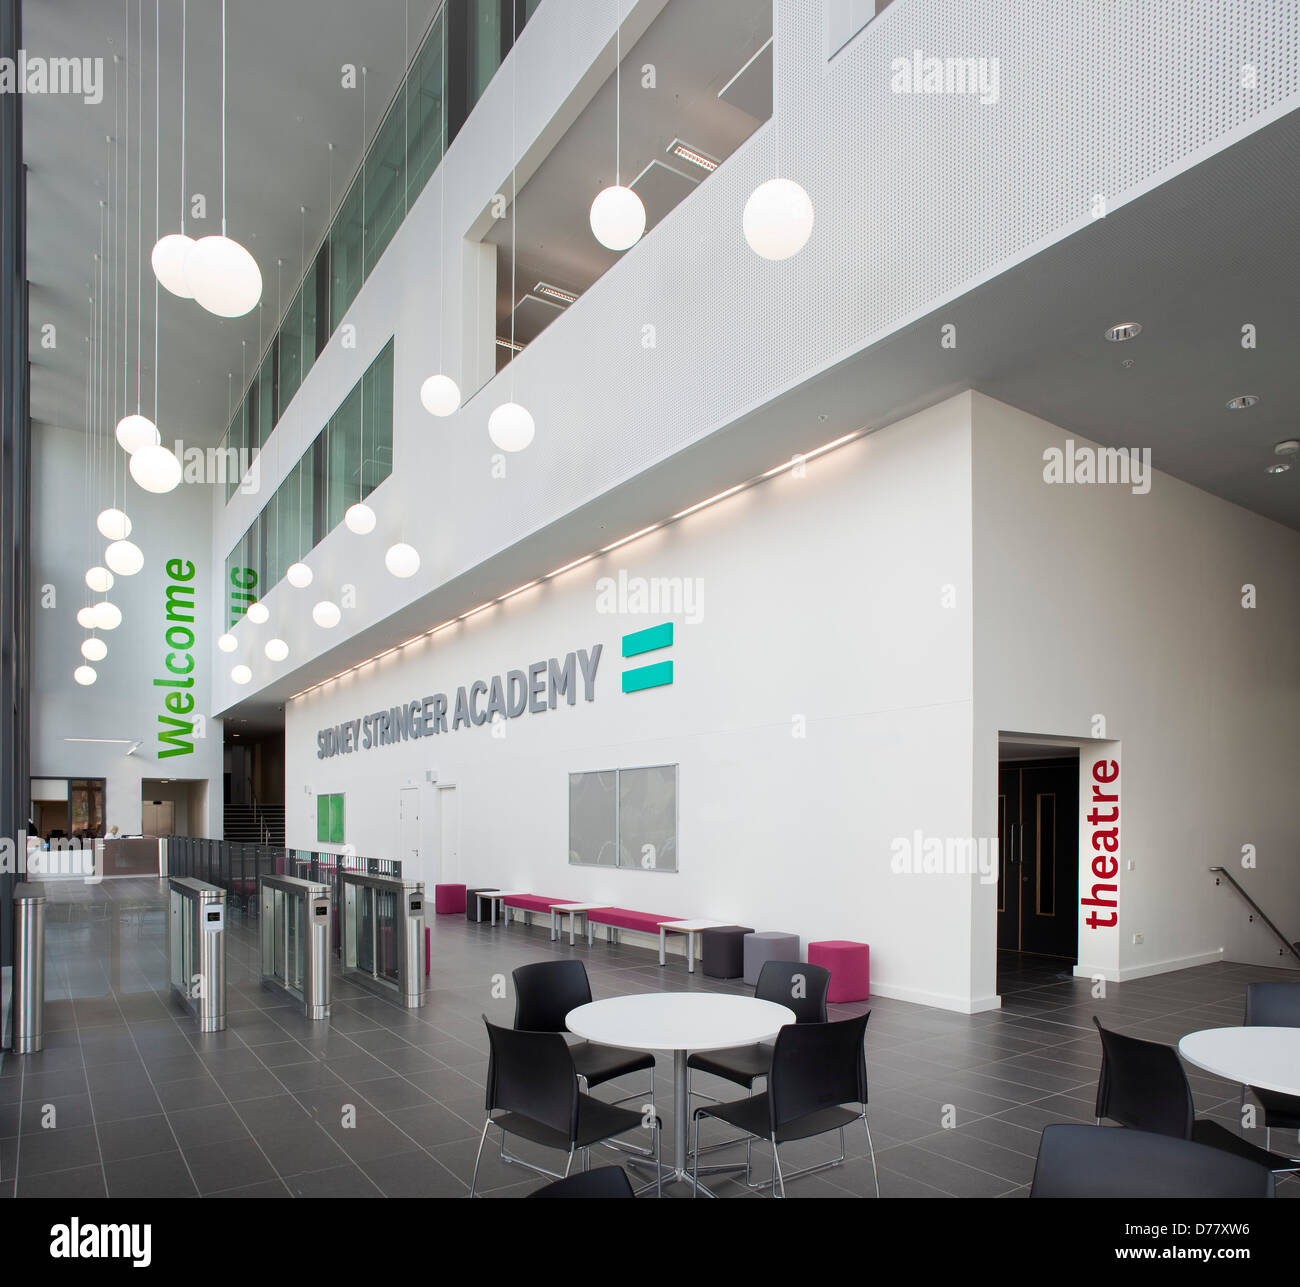 Sidney Stringer Academy, Coventry, Coventry, United Kingdom. Architect: Sheppard Robson , 2012. Double-height school reception a Stock Photo